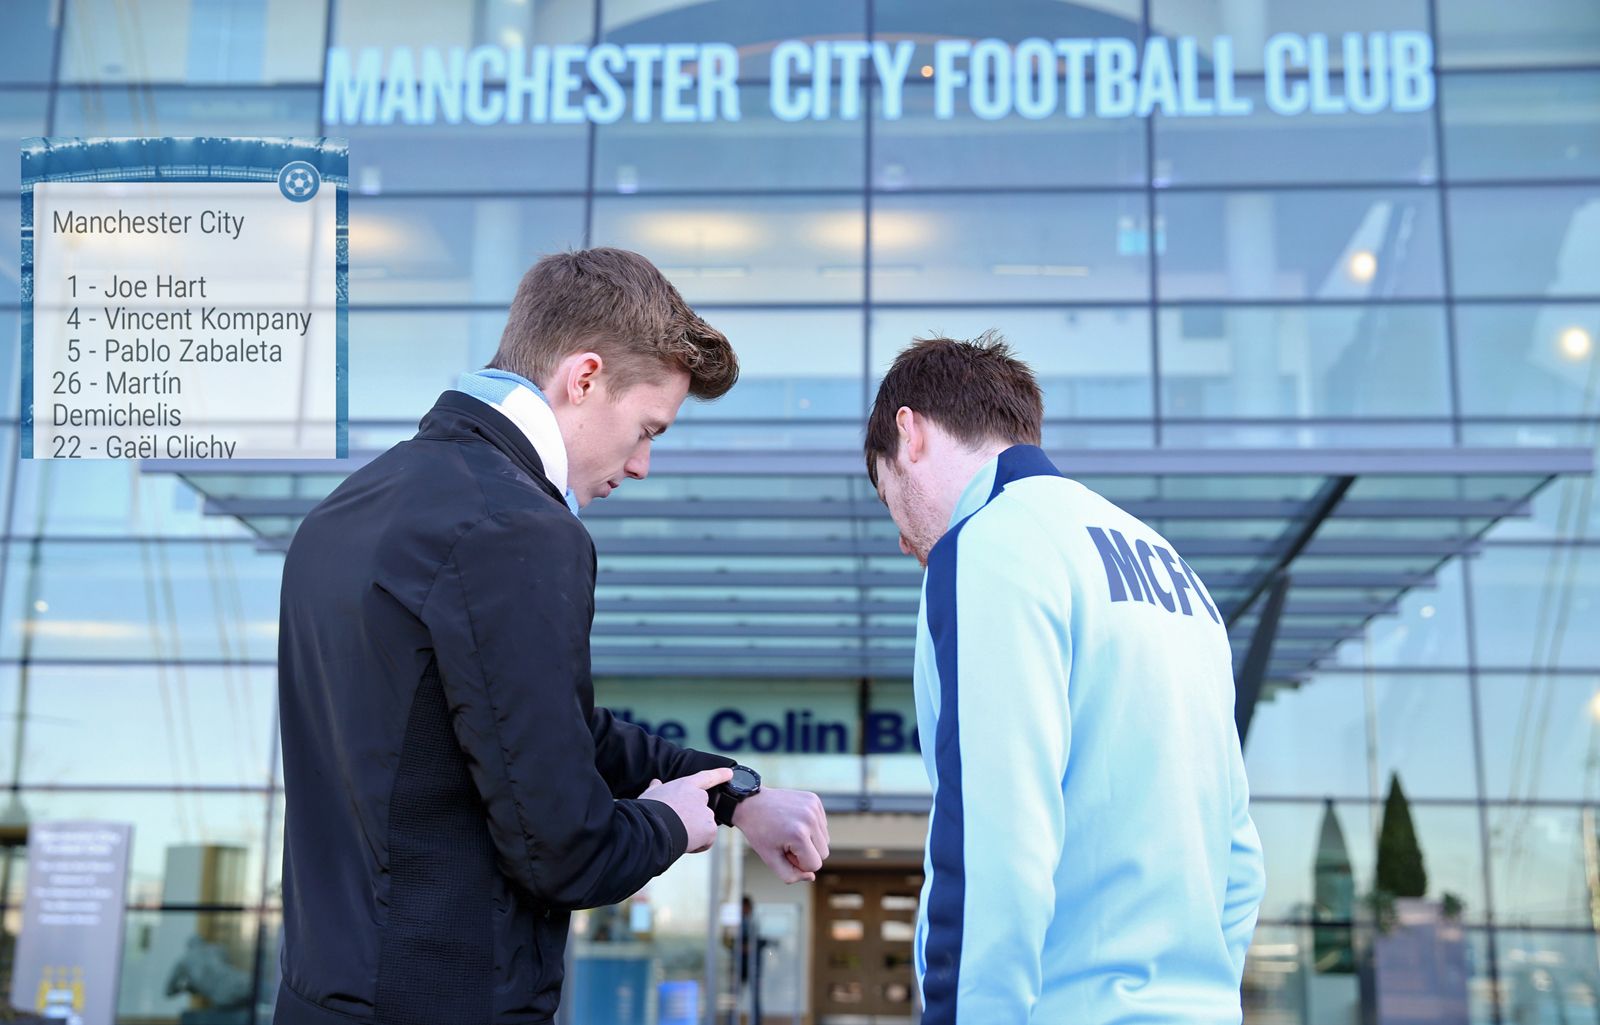 man city pioneers android wear apps for football updates on your wrist image 1